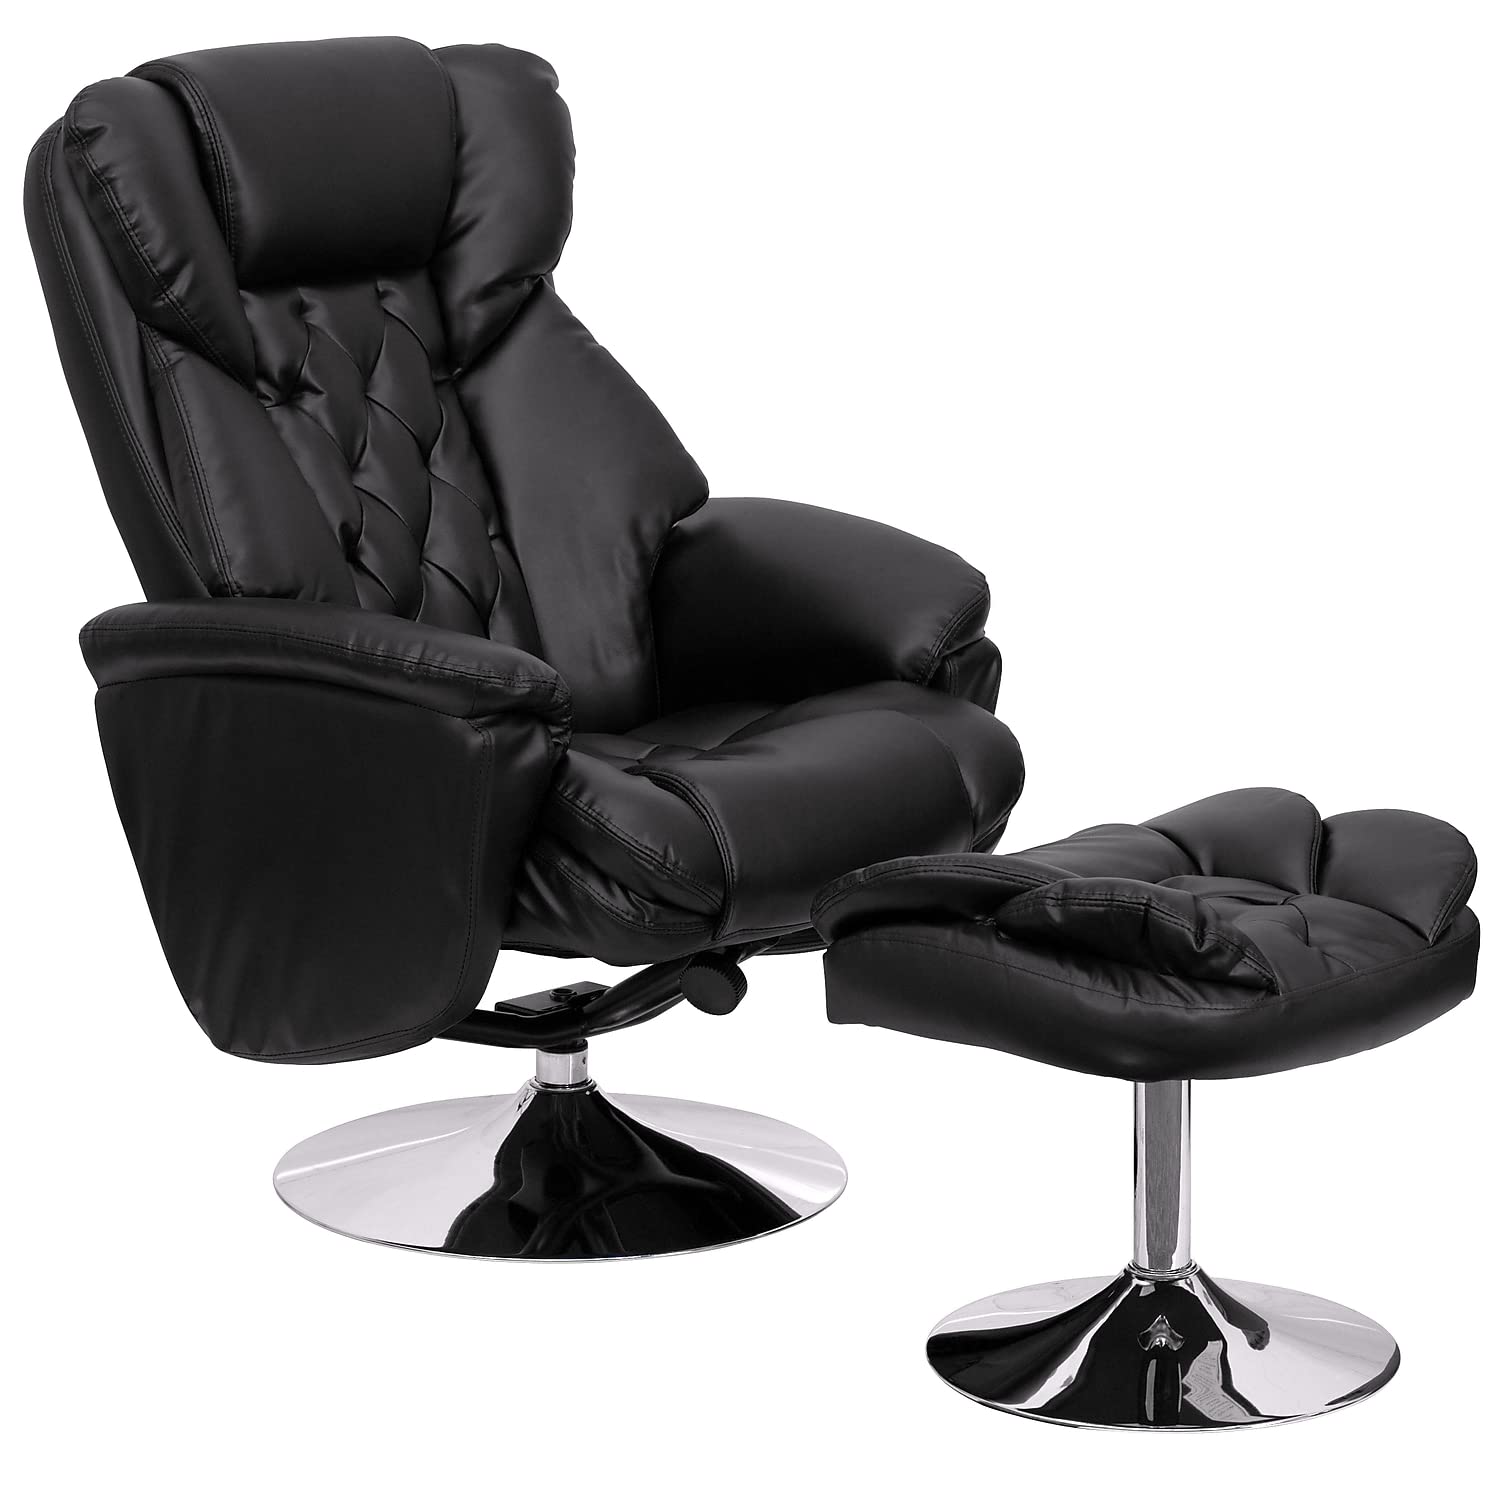 Flash Furniture 807Trad Transitional Leather Recliner and Ottoman with chrome Base, Black